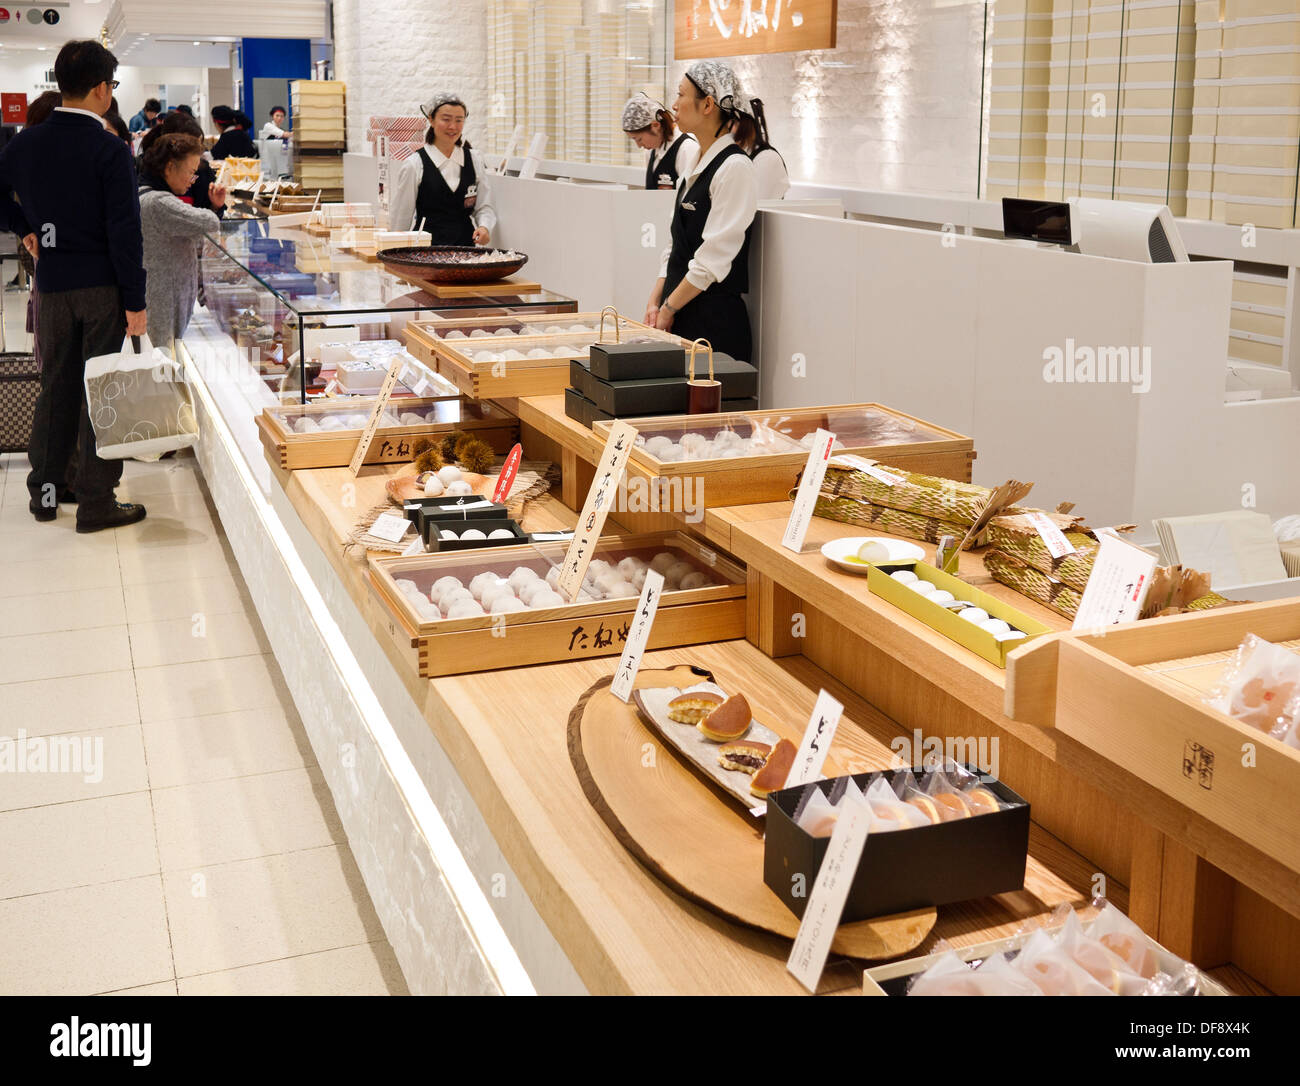 Japanese Sweets and Food for Sale at Sogo Department Store Basement Shopping Area (Depachika) with Food Hall Japan. Stock Photo